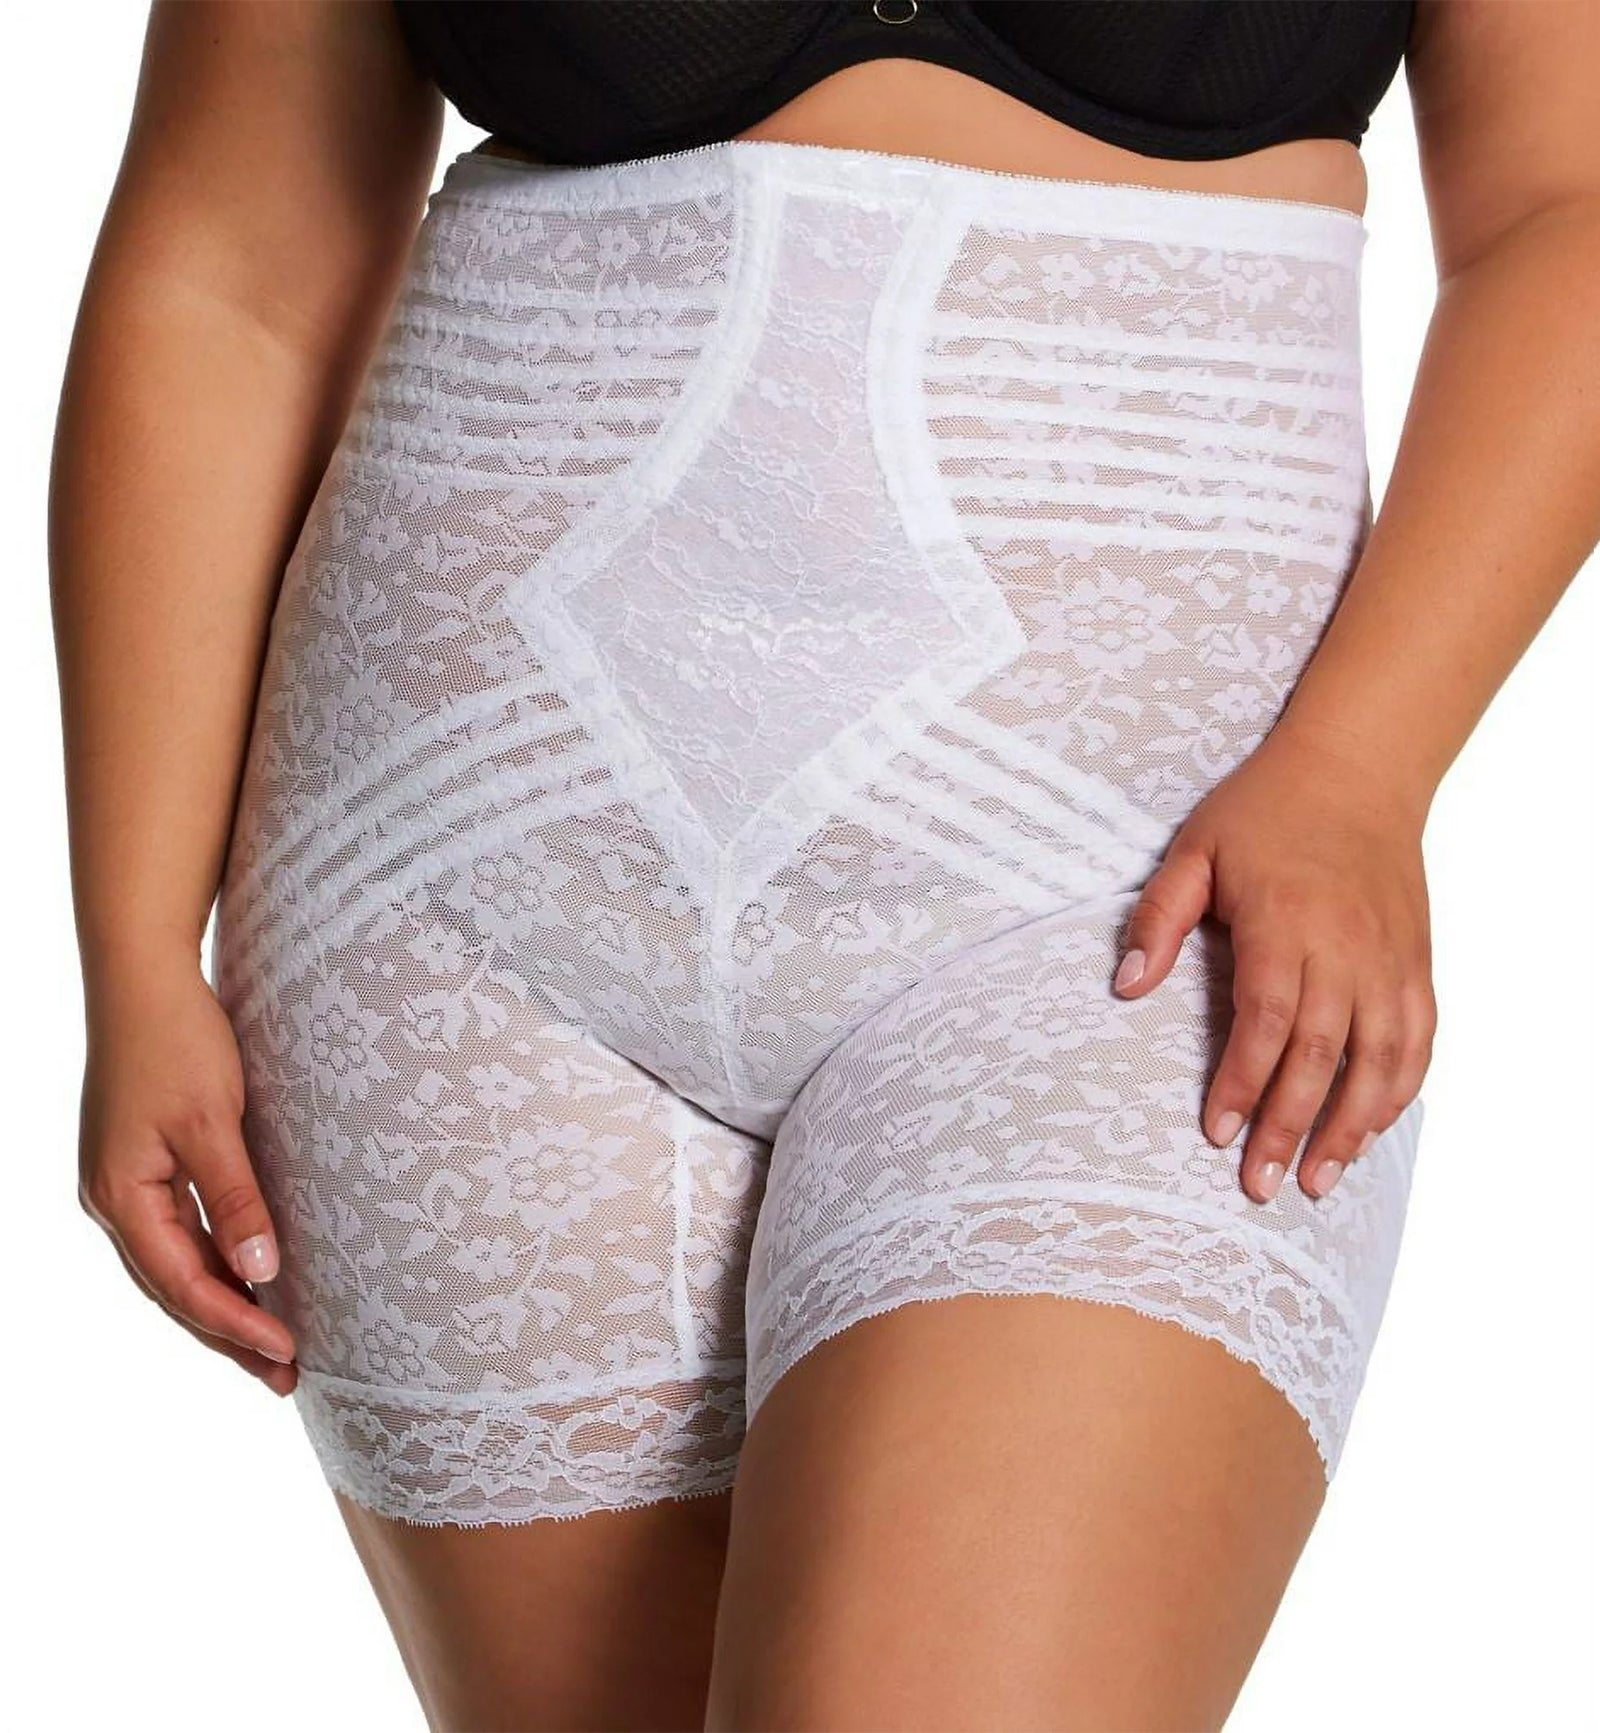 Smoothing, Sculpting, Snatched!, Extra Firm Long Leg Shaper